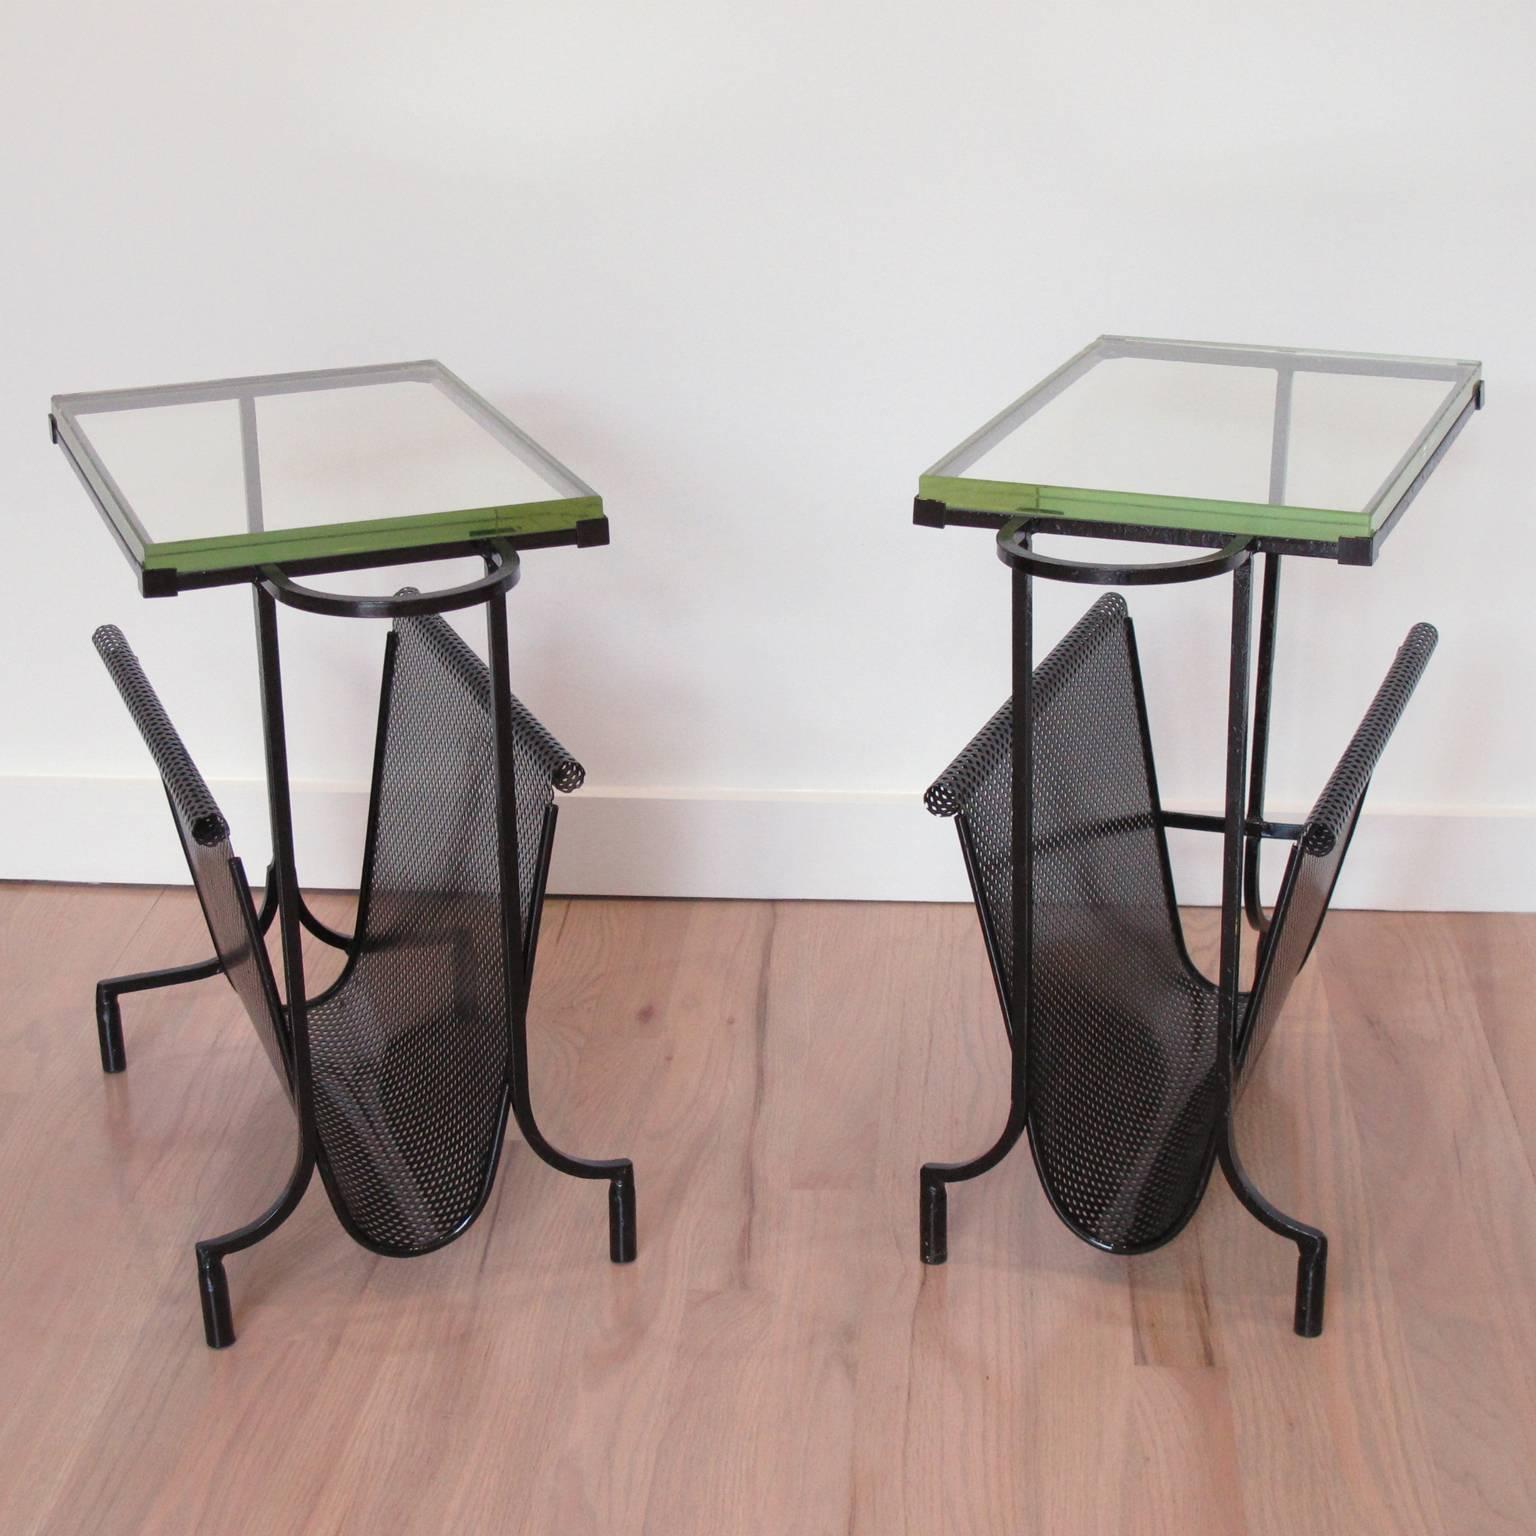 French Pair of Perforated Metal Magazine Stand Side Table by Mathieu Matégot, 1950